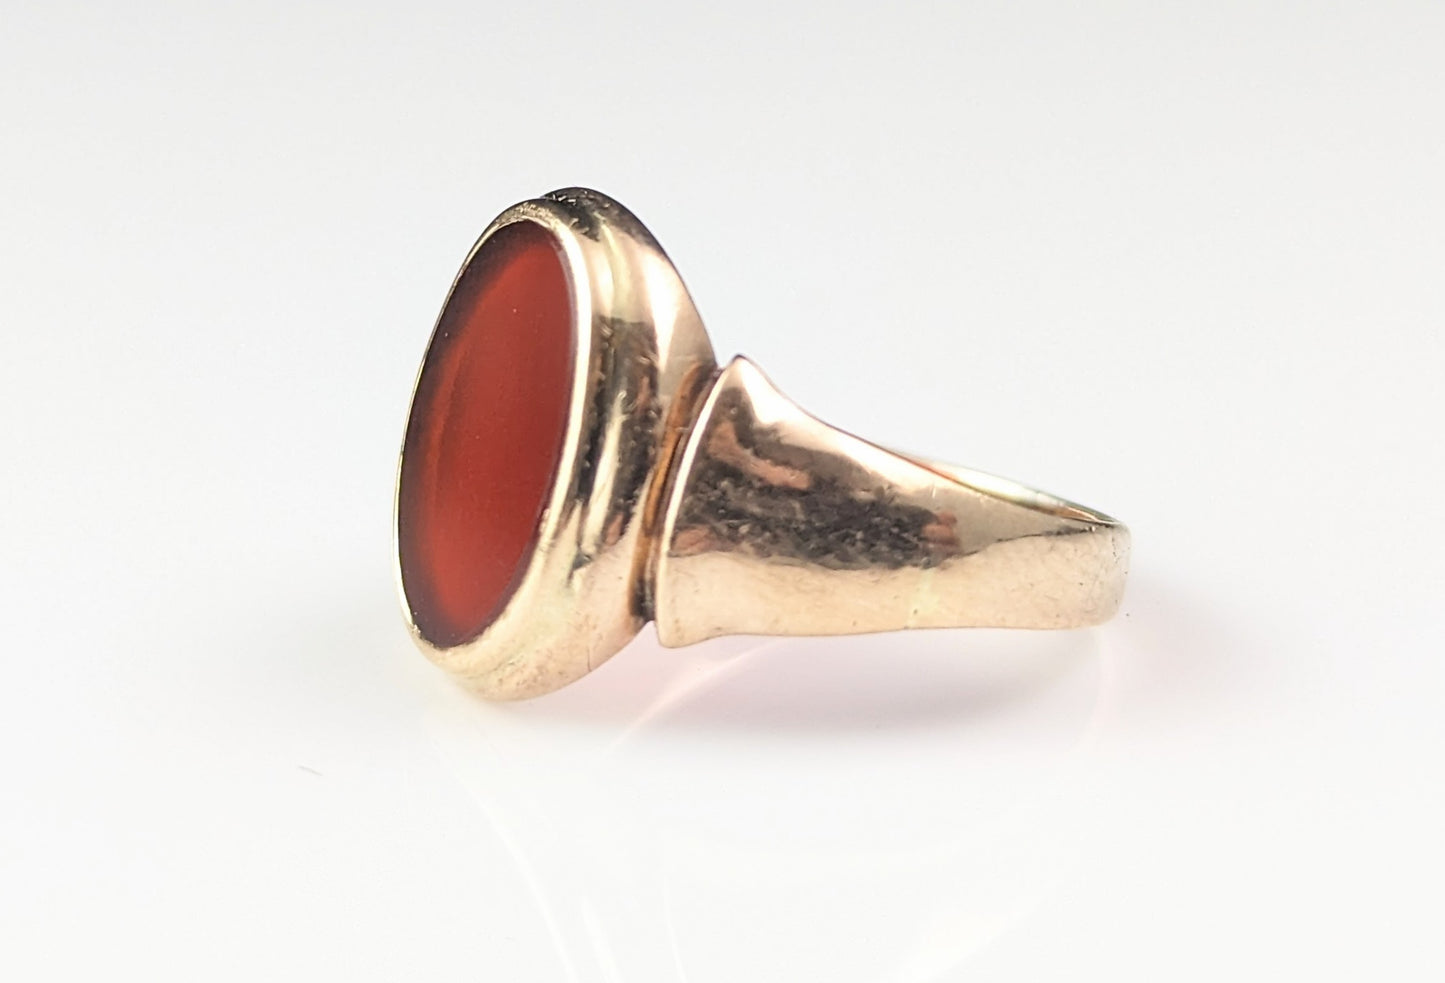 Antique Art Deco Carnelian Signet ring, 9ct gold, Pinky ring